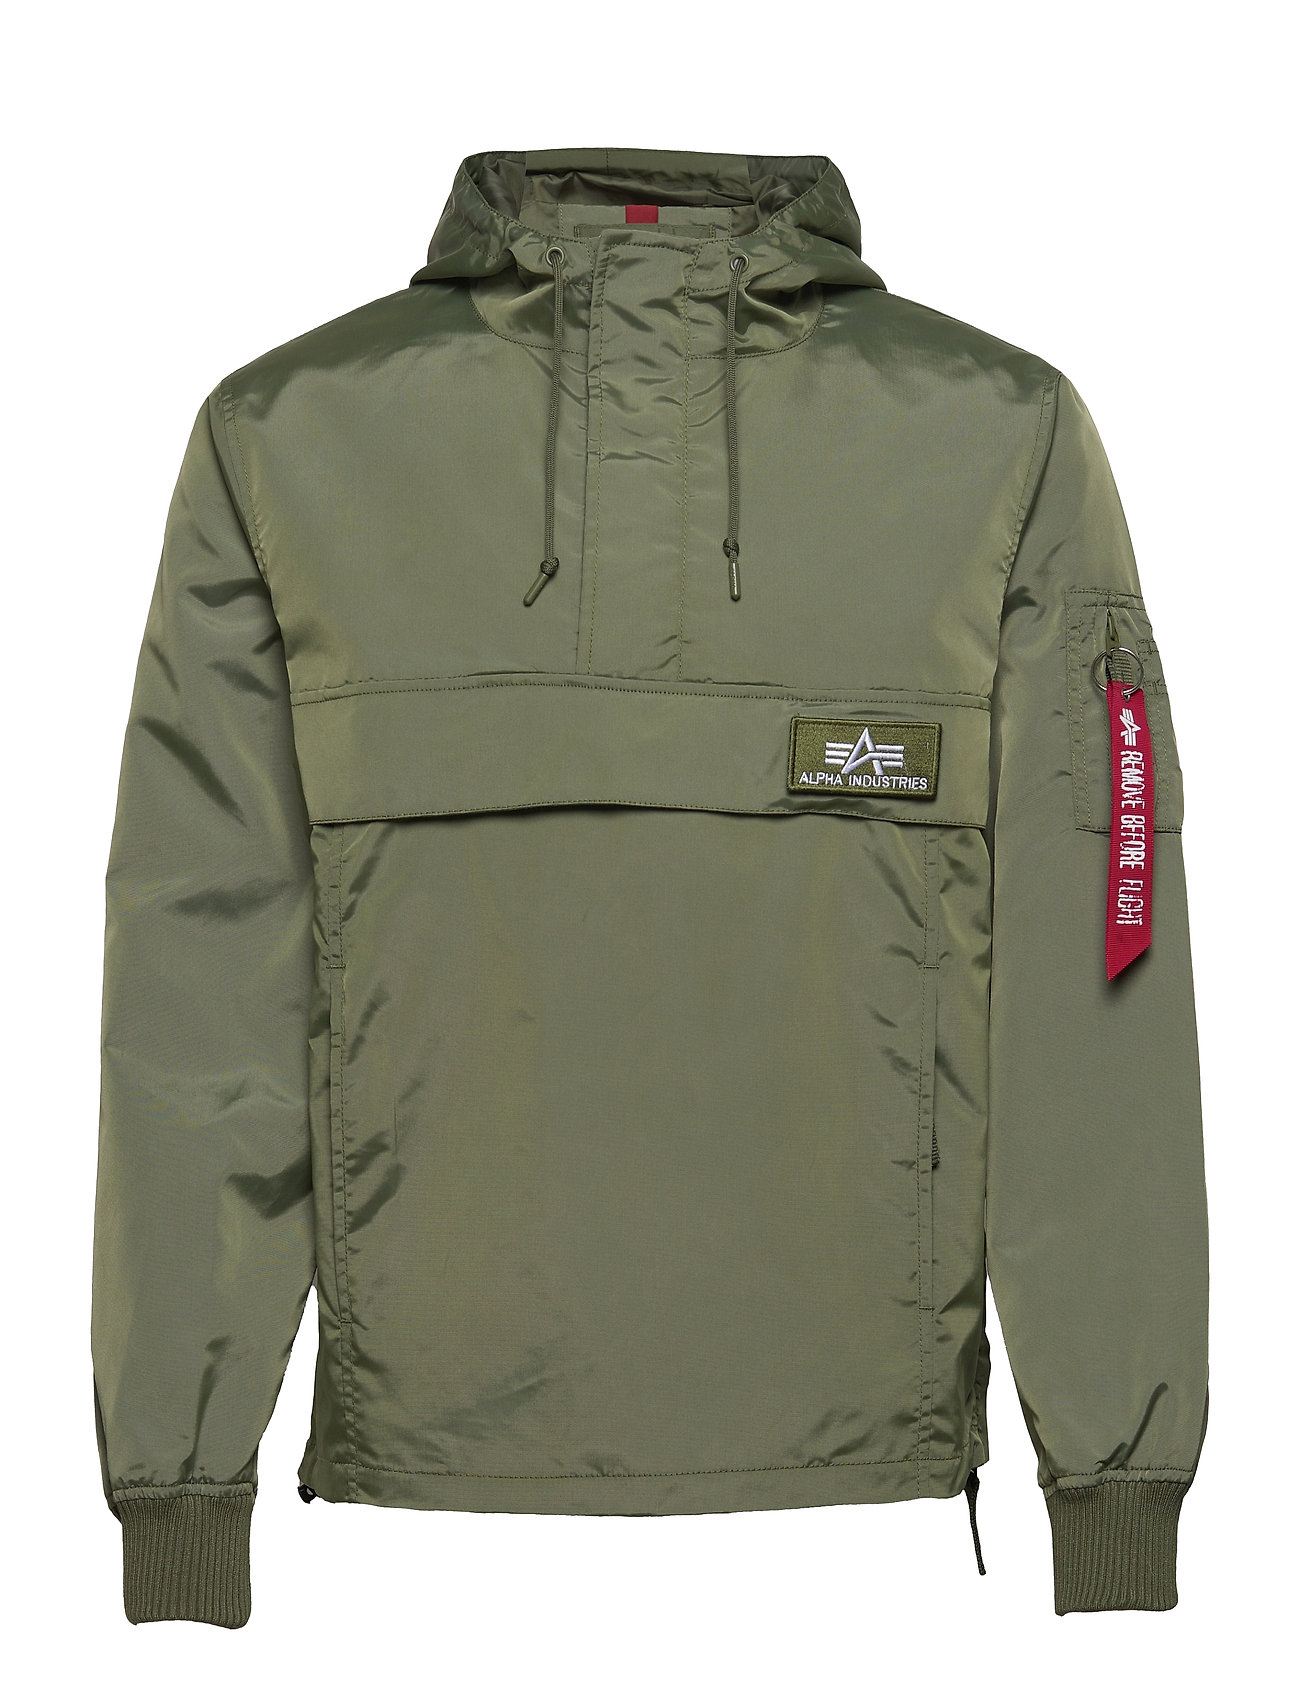 at returns Buy - from Boozt.com. delivery Industries online Tt Alpha easy Fast and Anorak €. Anorak 140 Lw Industries Alpha